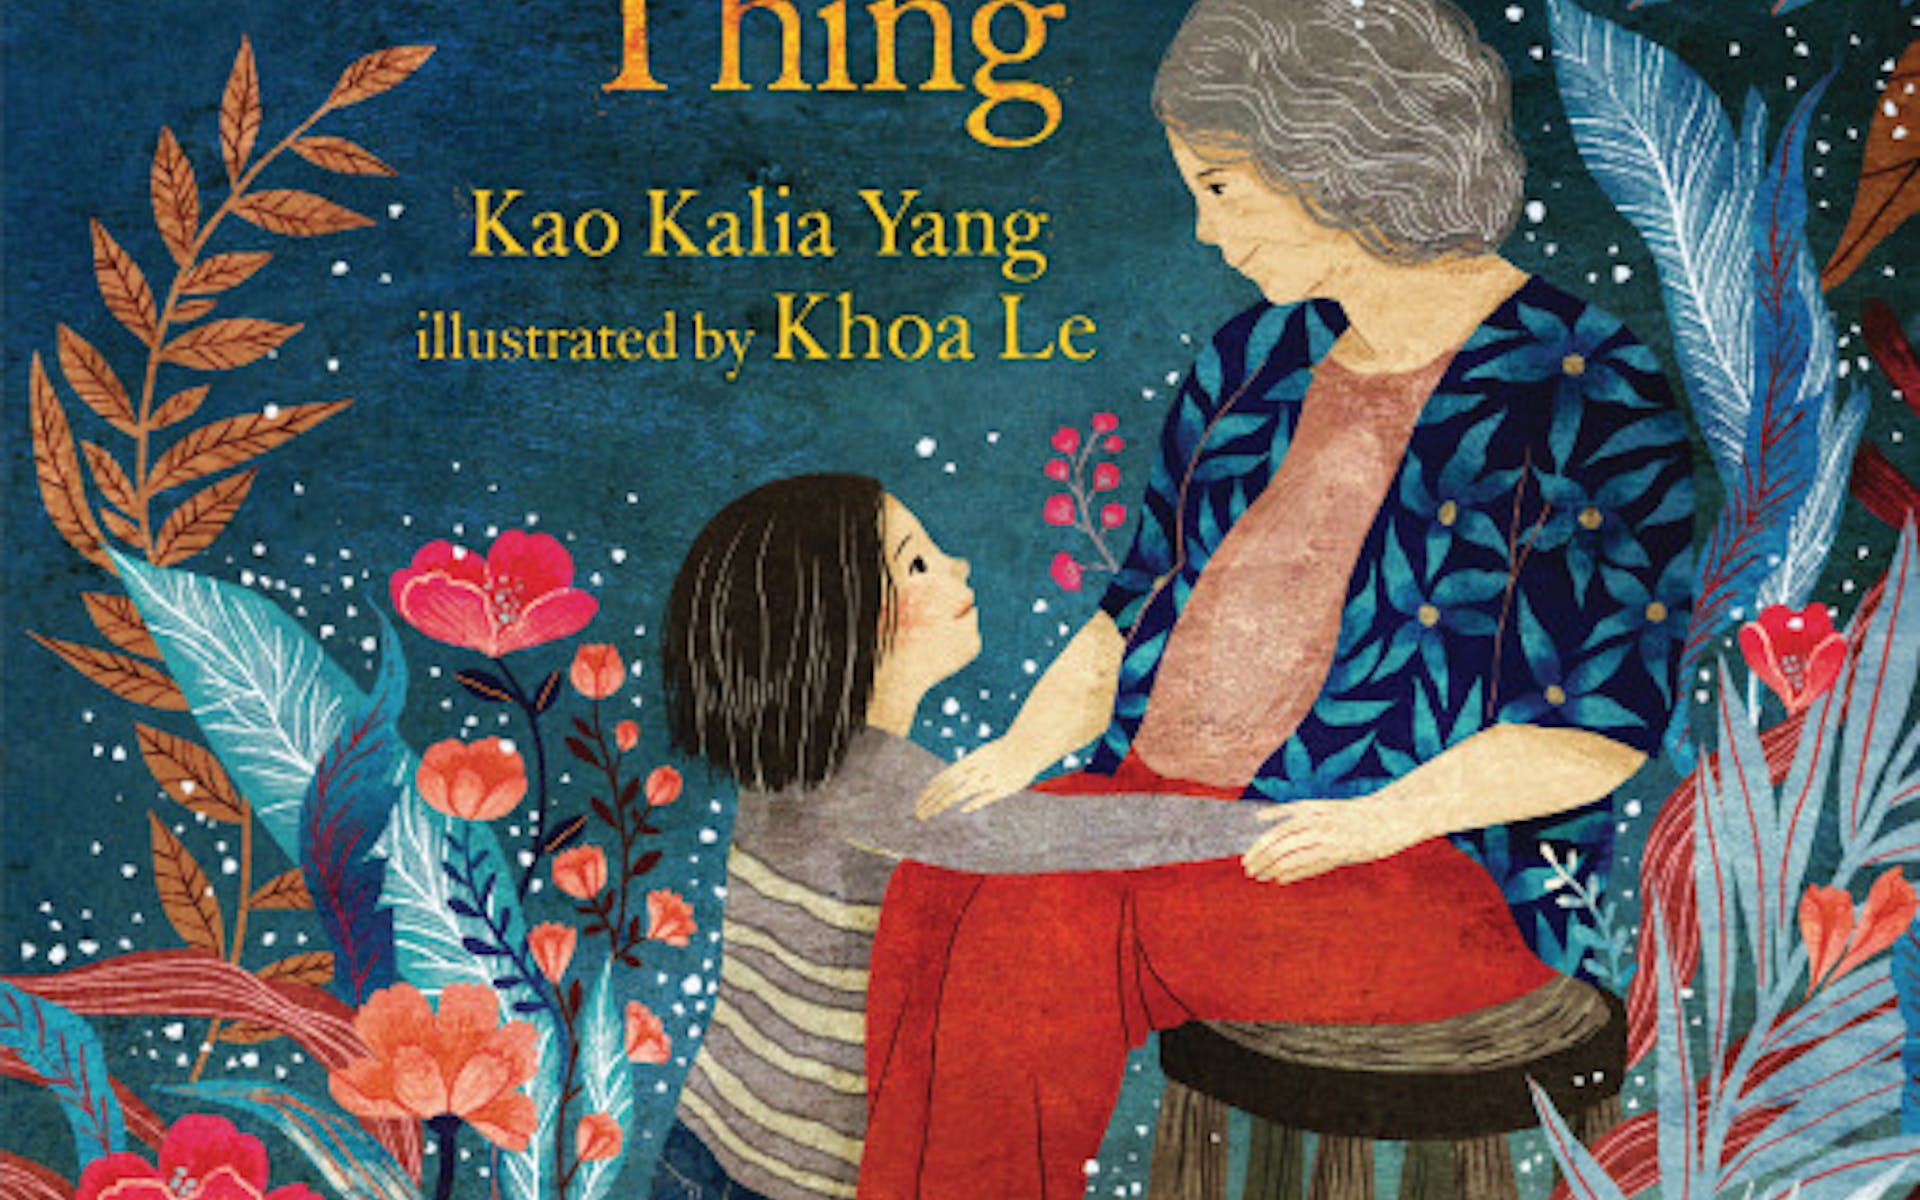 The Most Beautiful Thing, by Kao Kalia Yang, illustrated by Khoa Le